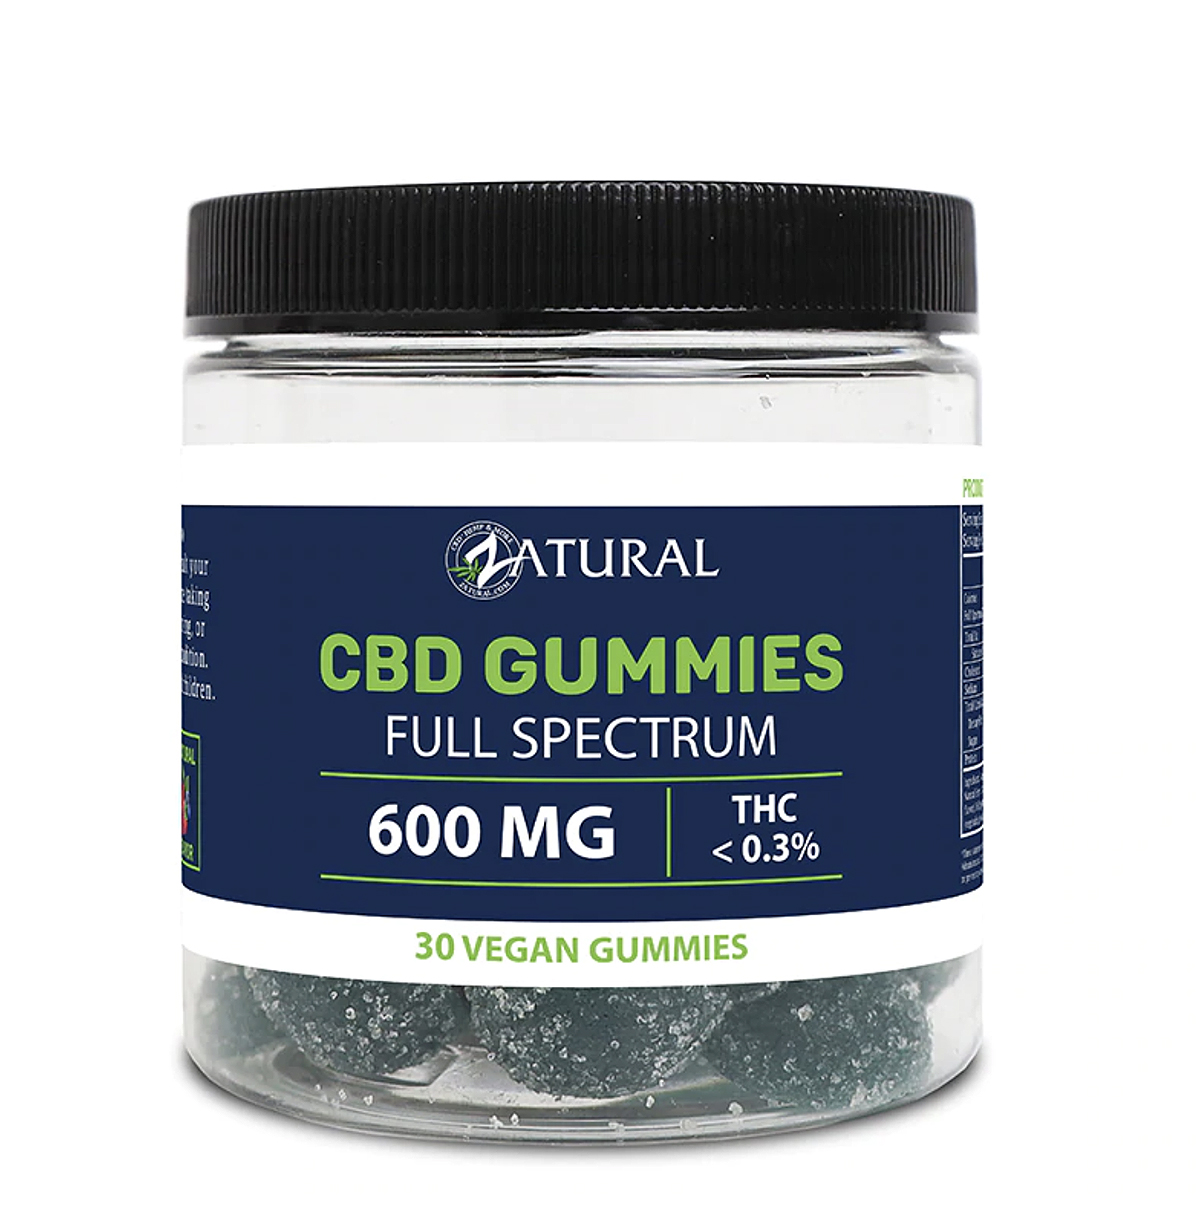 what is the price of CBD gummies